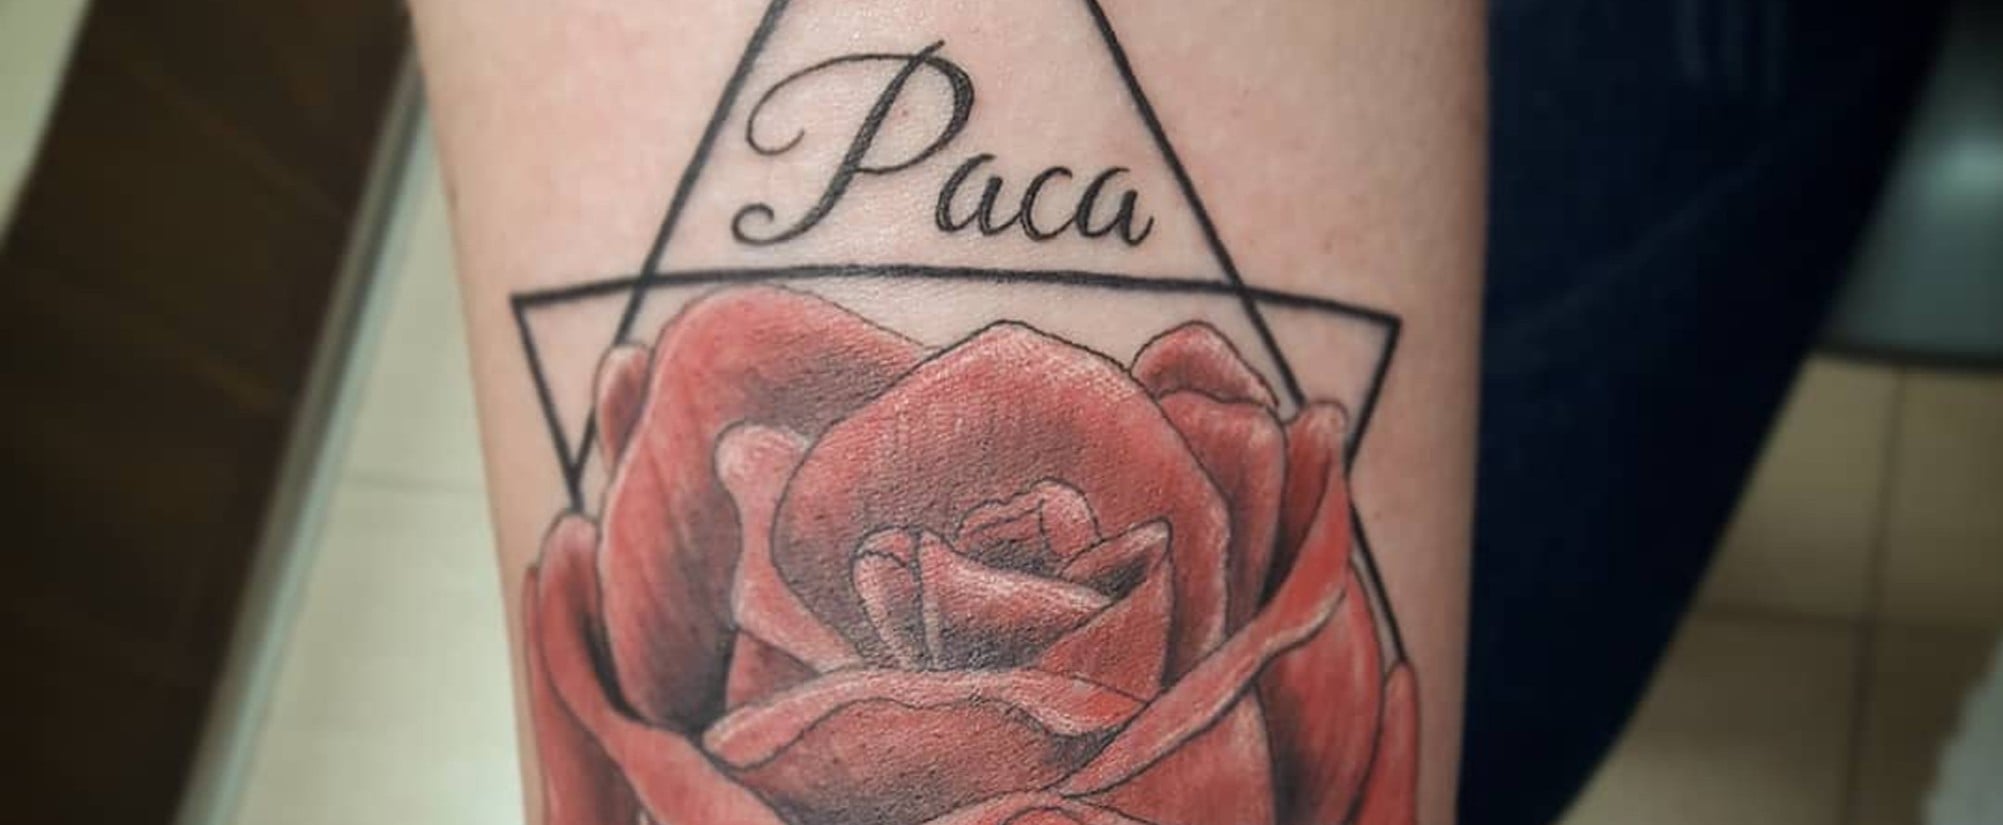 Tattoo Ideas With Baby Names